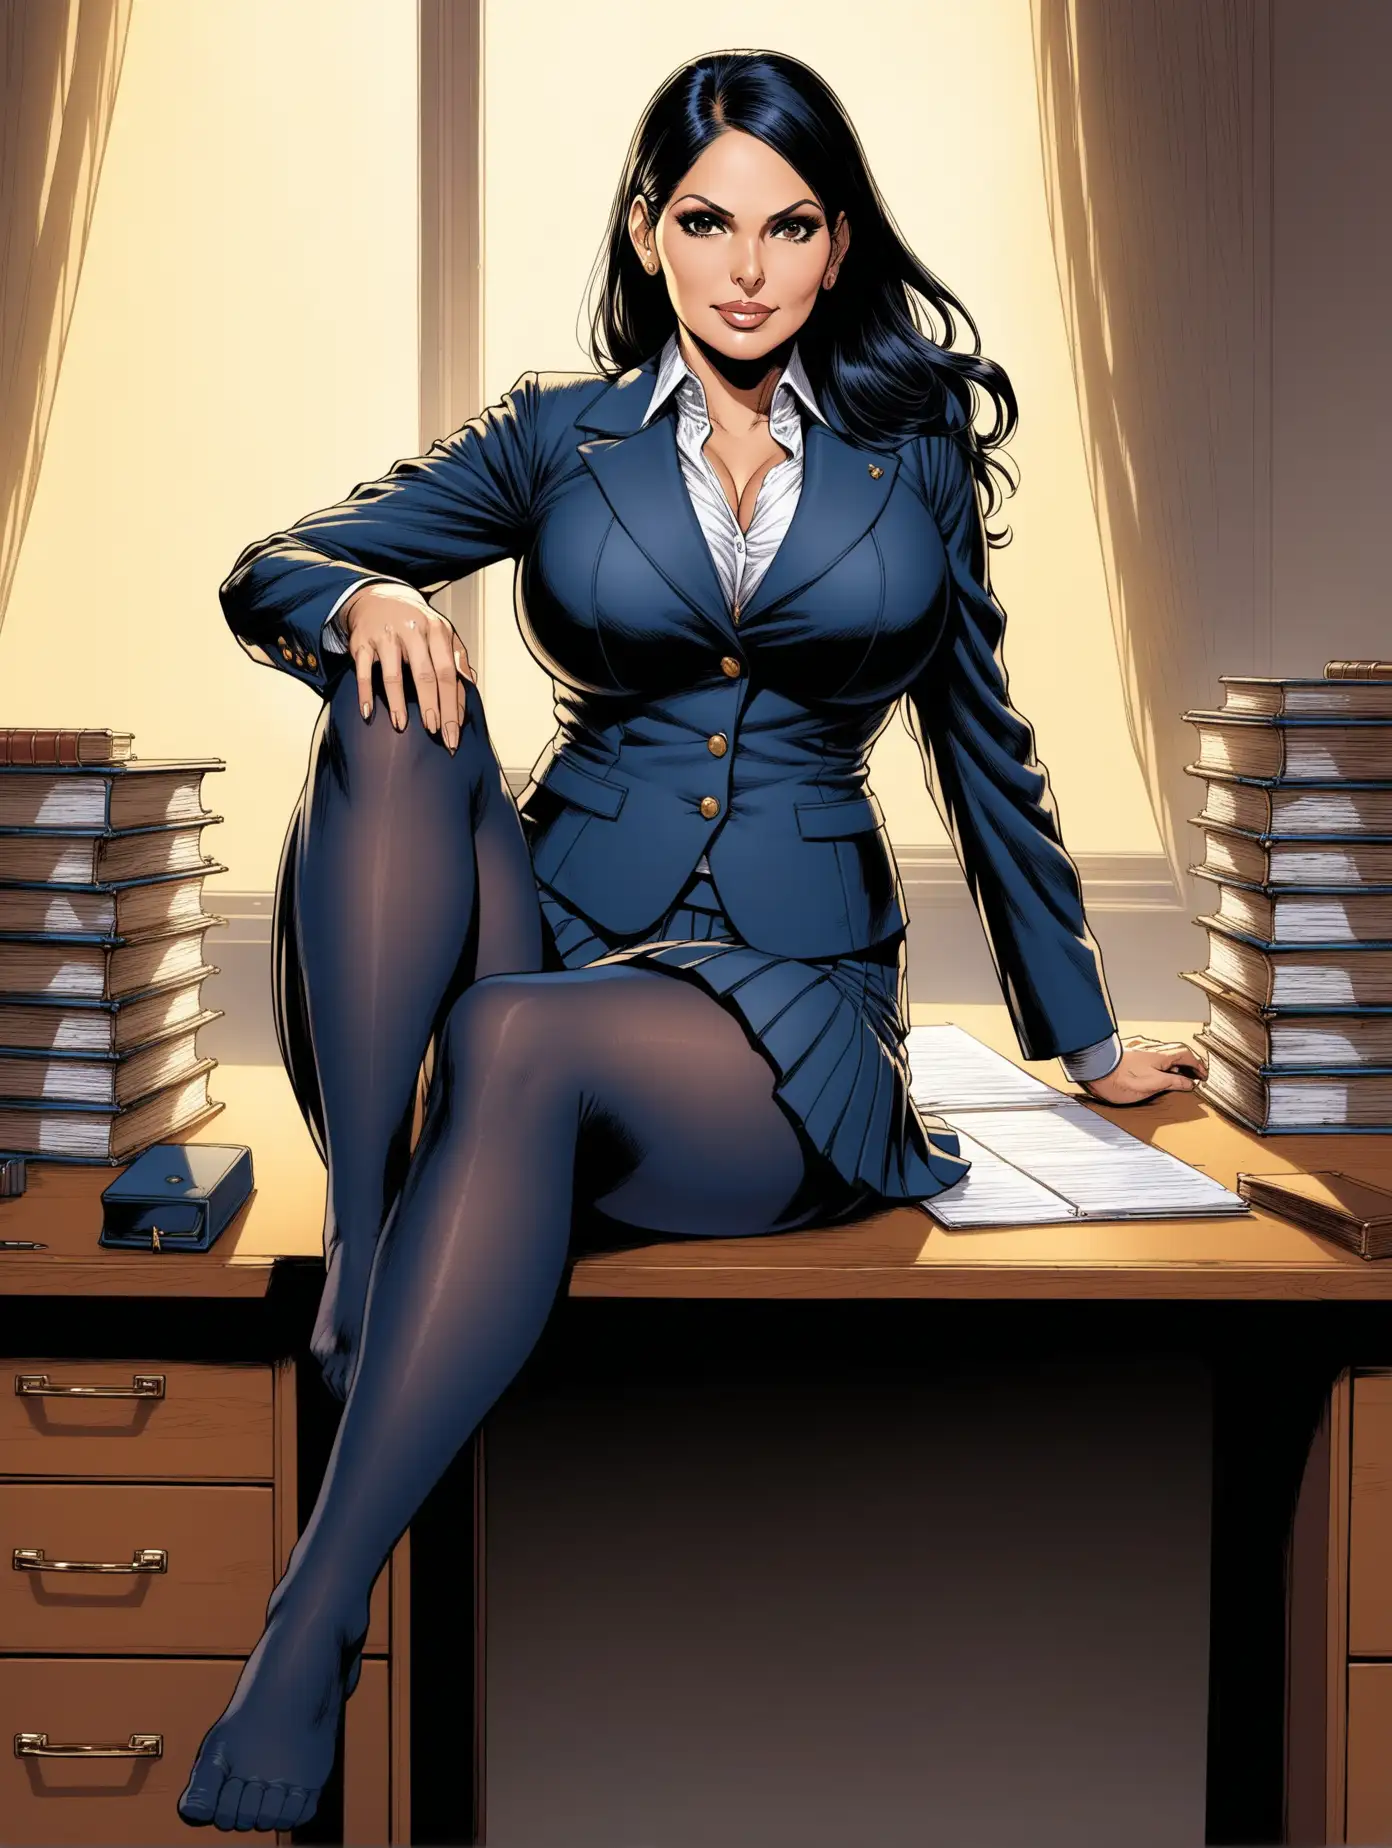 Mature, Priti Patel, dark navy pleated skirt suit [Highly Detailed] Bernie Wrightson art style, navy pantyhose, cleavage, relaxed with feet up on top of desk